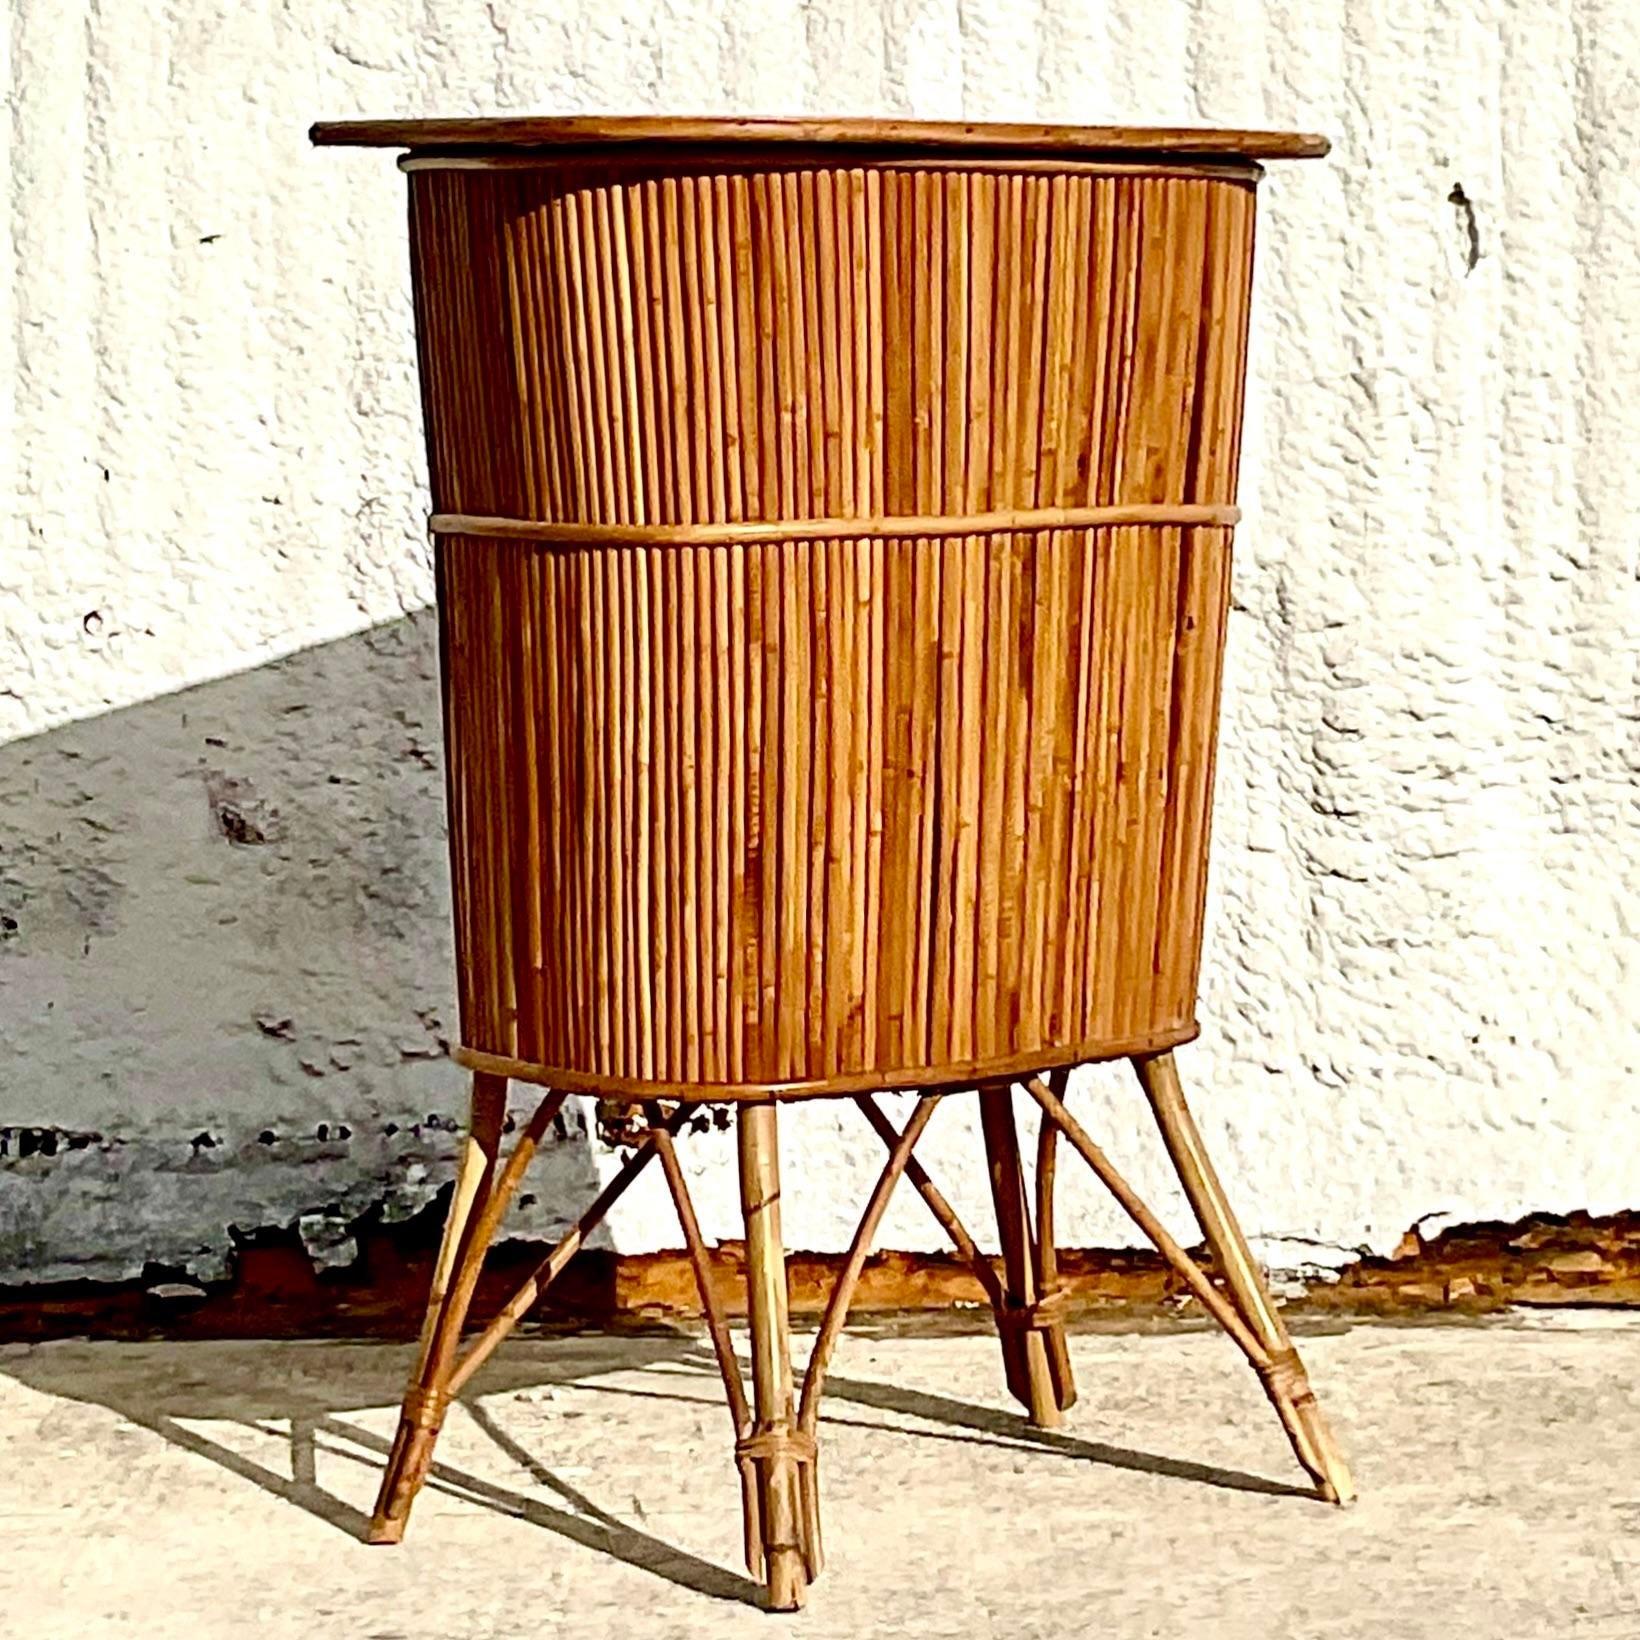 A chic vintage Coastal petite dry bar. made in France in the 1950s. A small profile with additional storage below. Perfect for big city dwellers that want the glamour, but don’t have the space. Voila! Your prayers have been answered. Would also be